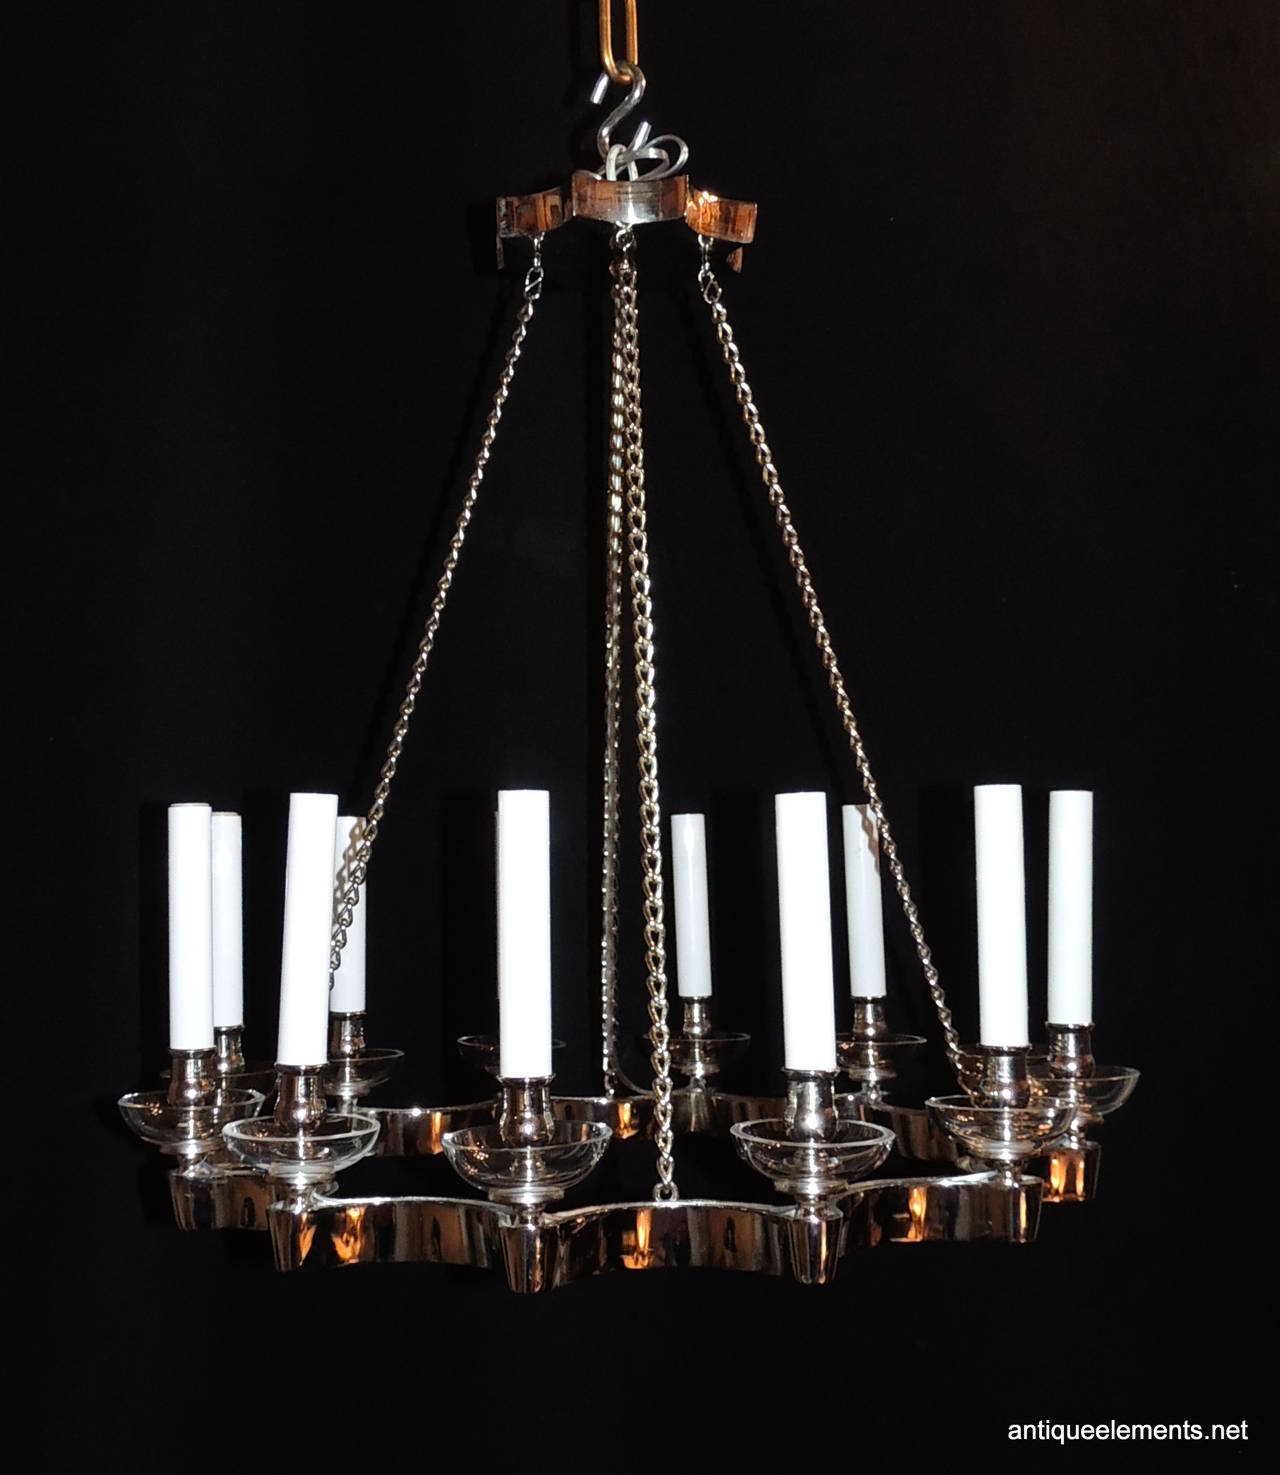 A Mid-Century Modern chrome / nickel fixture that is simply elegant. This pendant style chandelier with twelve lights is a wonderful open soft circular shape that is supported by four silver chains and a wonderful chrome canopy. Each of the